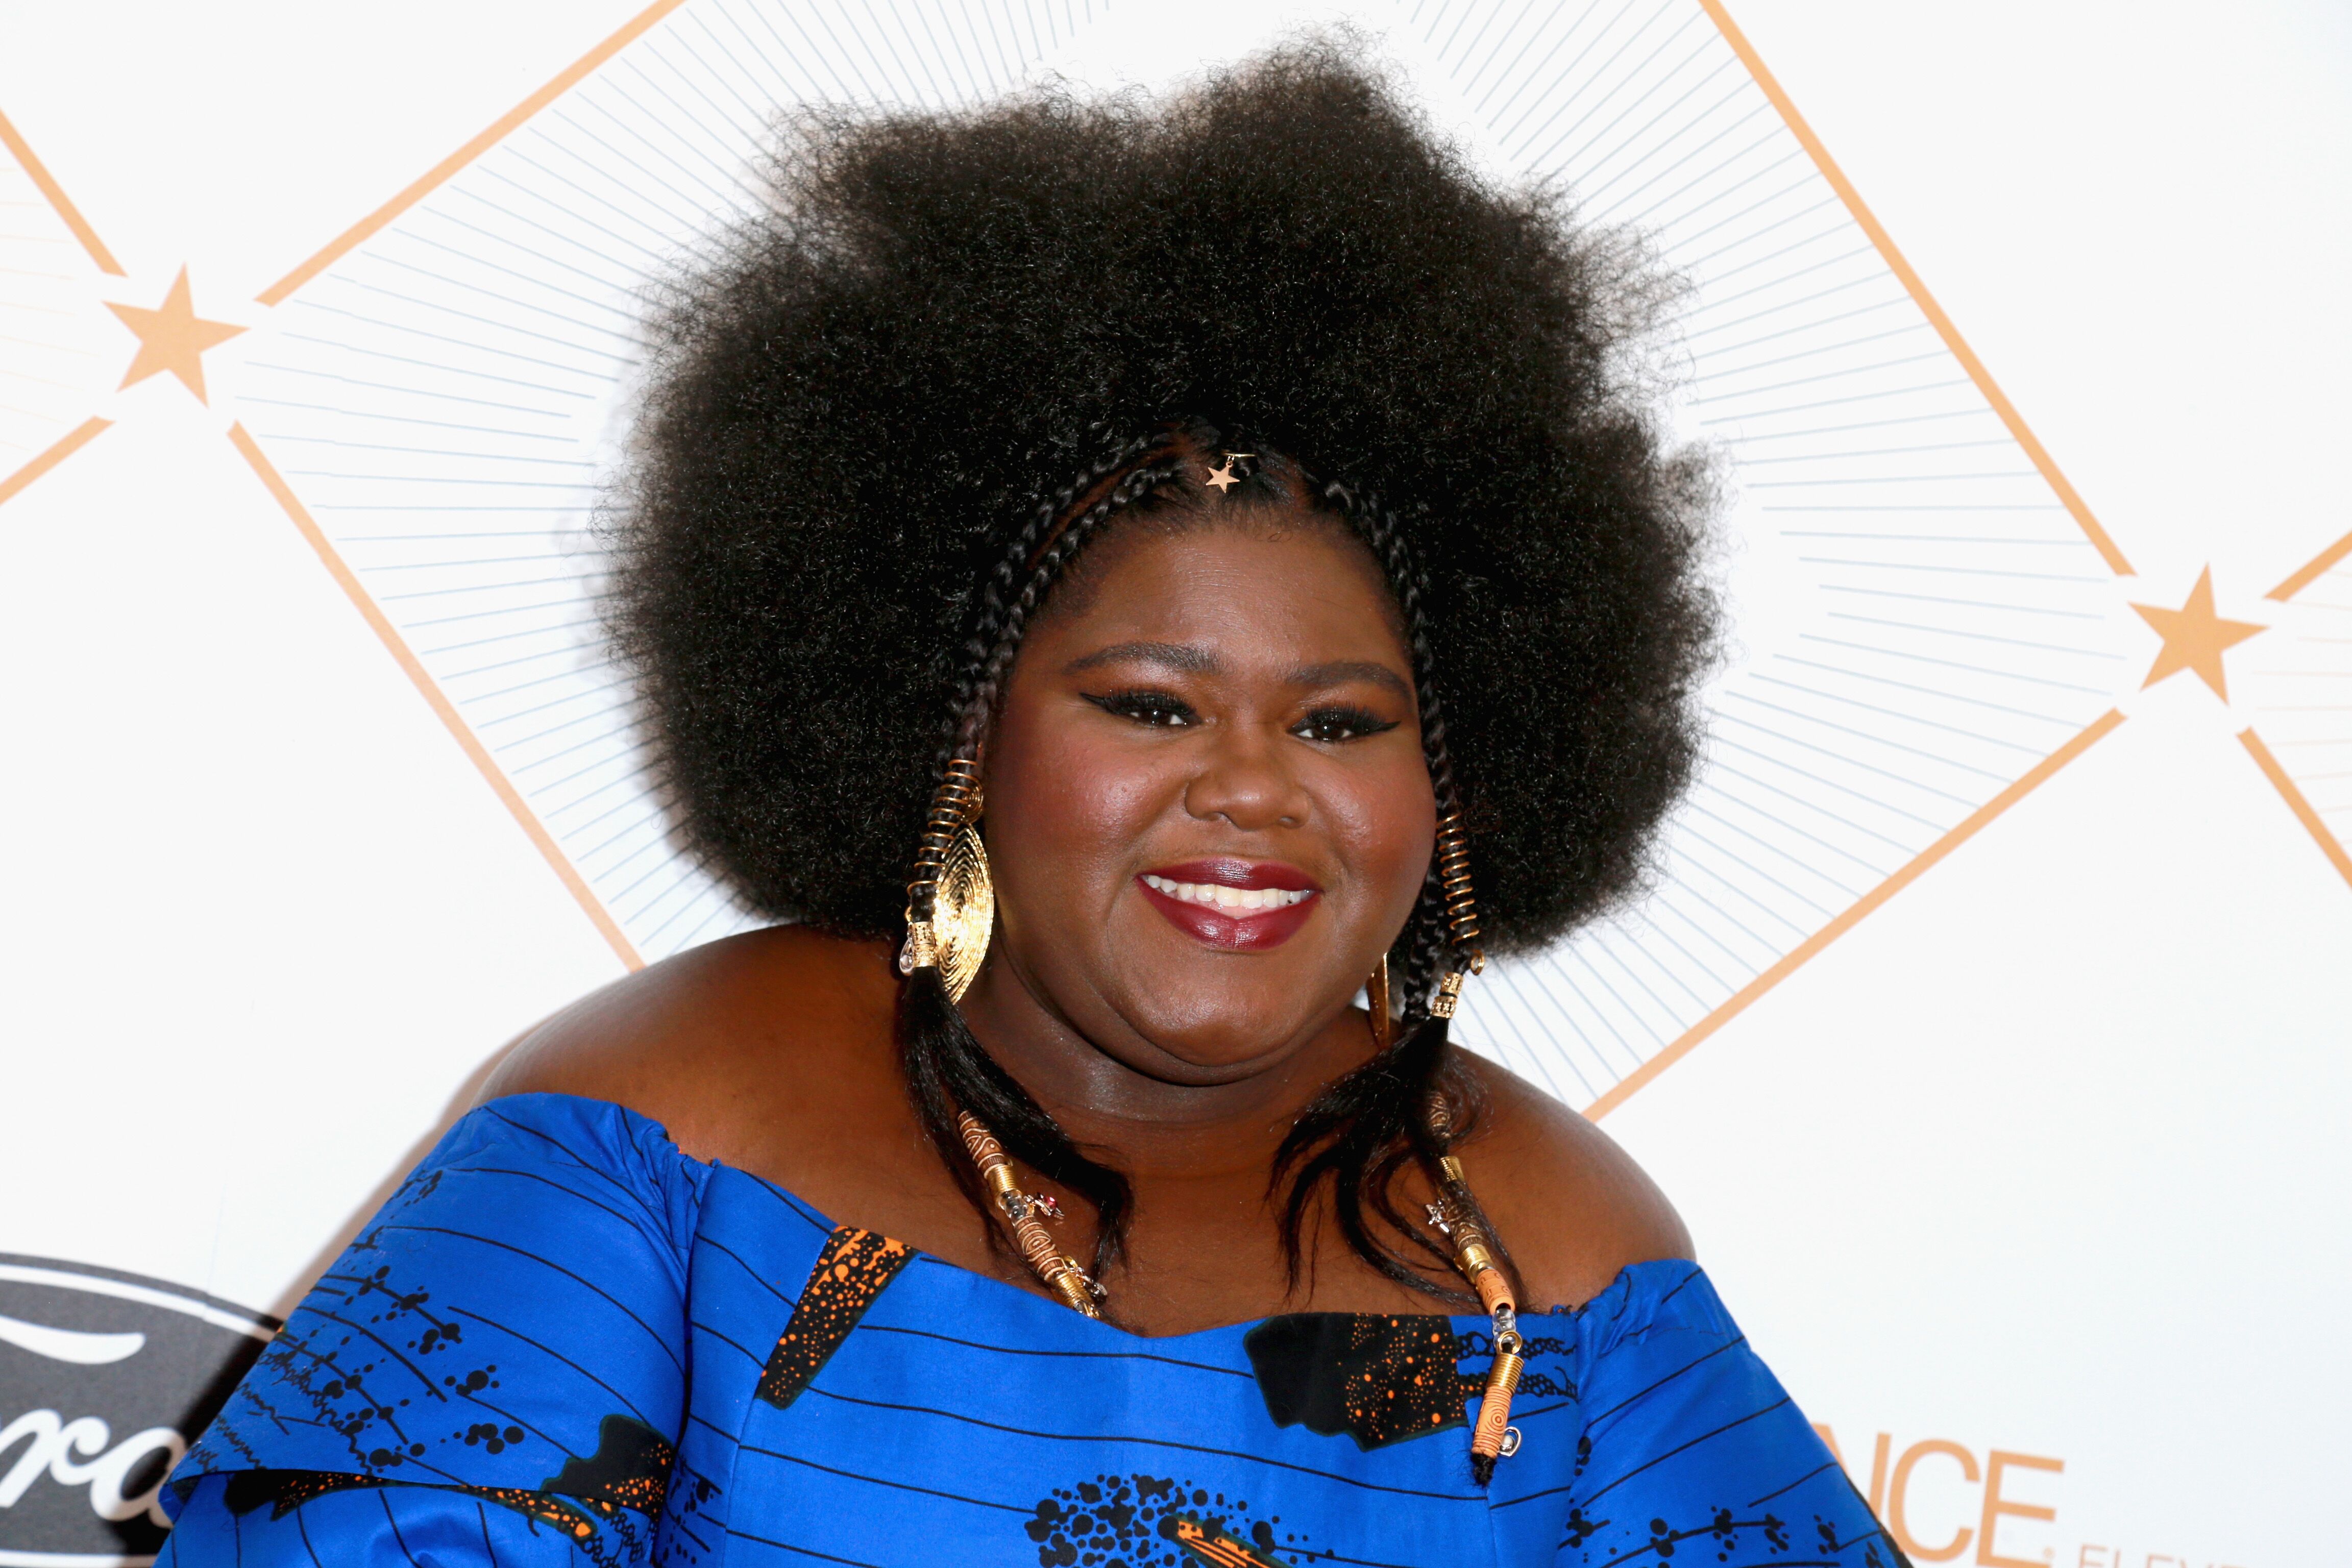 Gabourey Sidibe at the 2018 Essence Black Women In Hollywood Oscars Luncheon/ Source: Getty Images